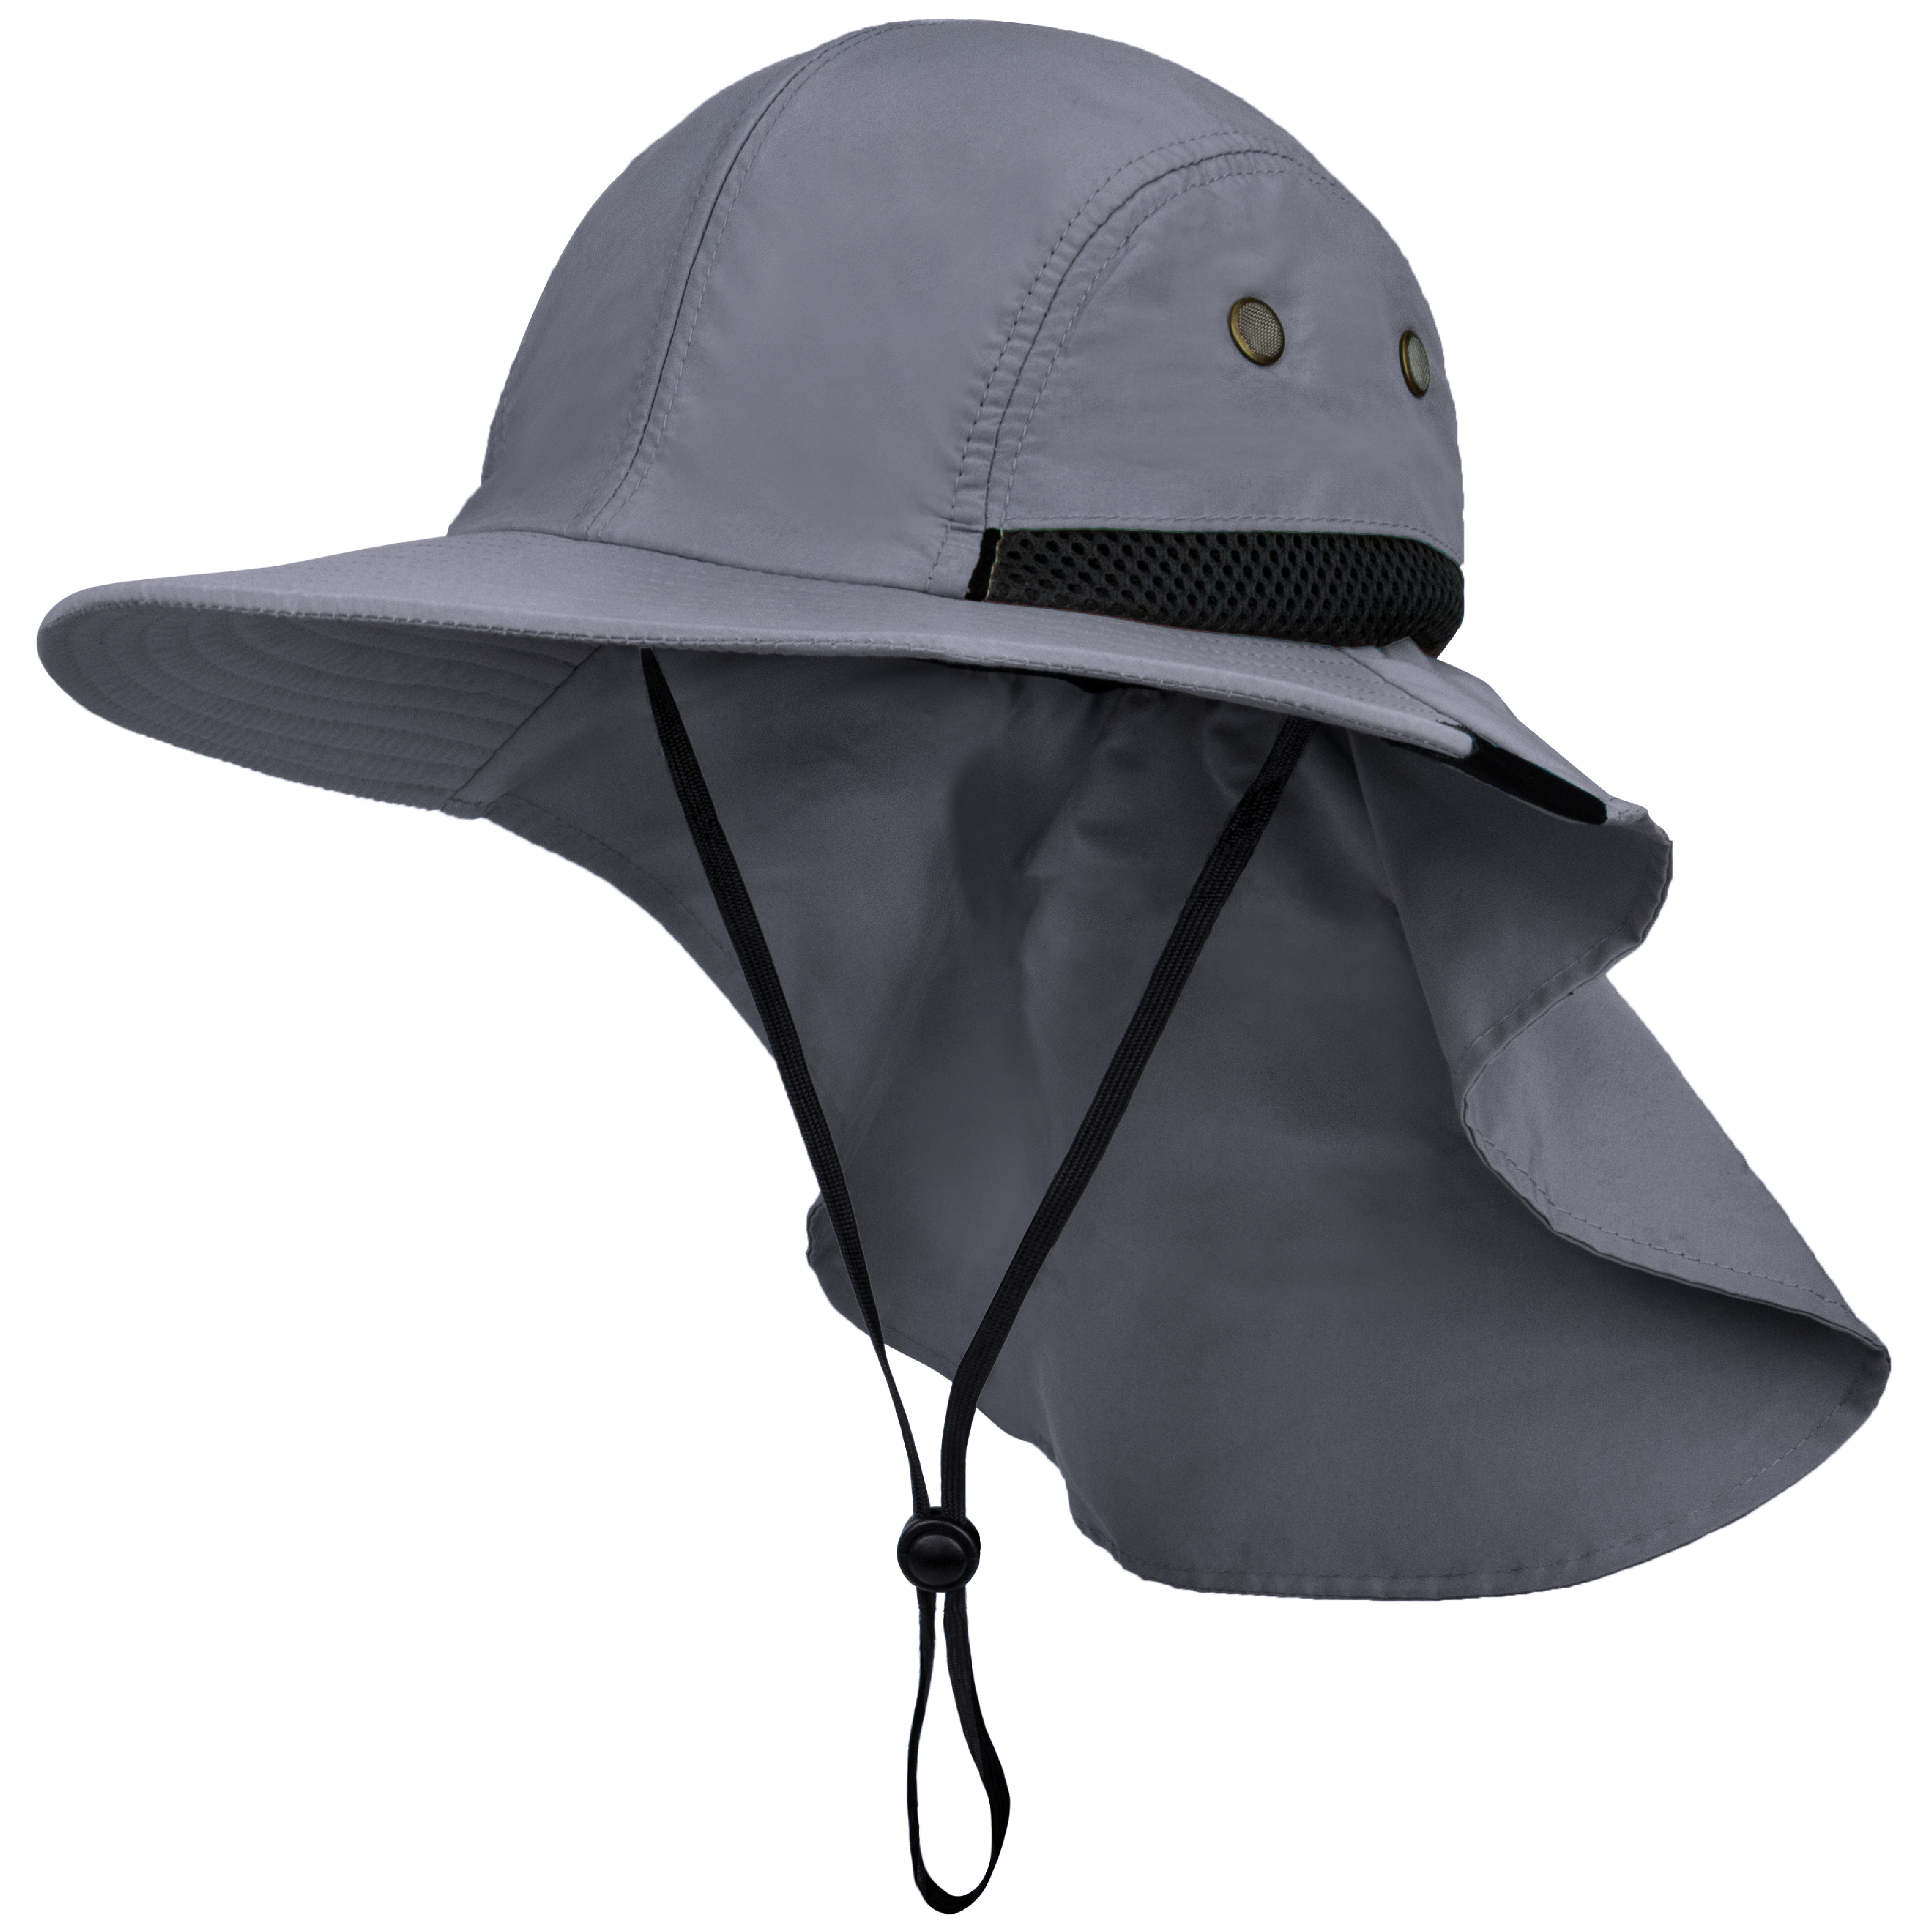 Details about   Men Women Boonie Hat With Neck Flap Fishing Hiking Outdoor UV Protection Sun Hat 